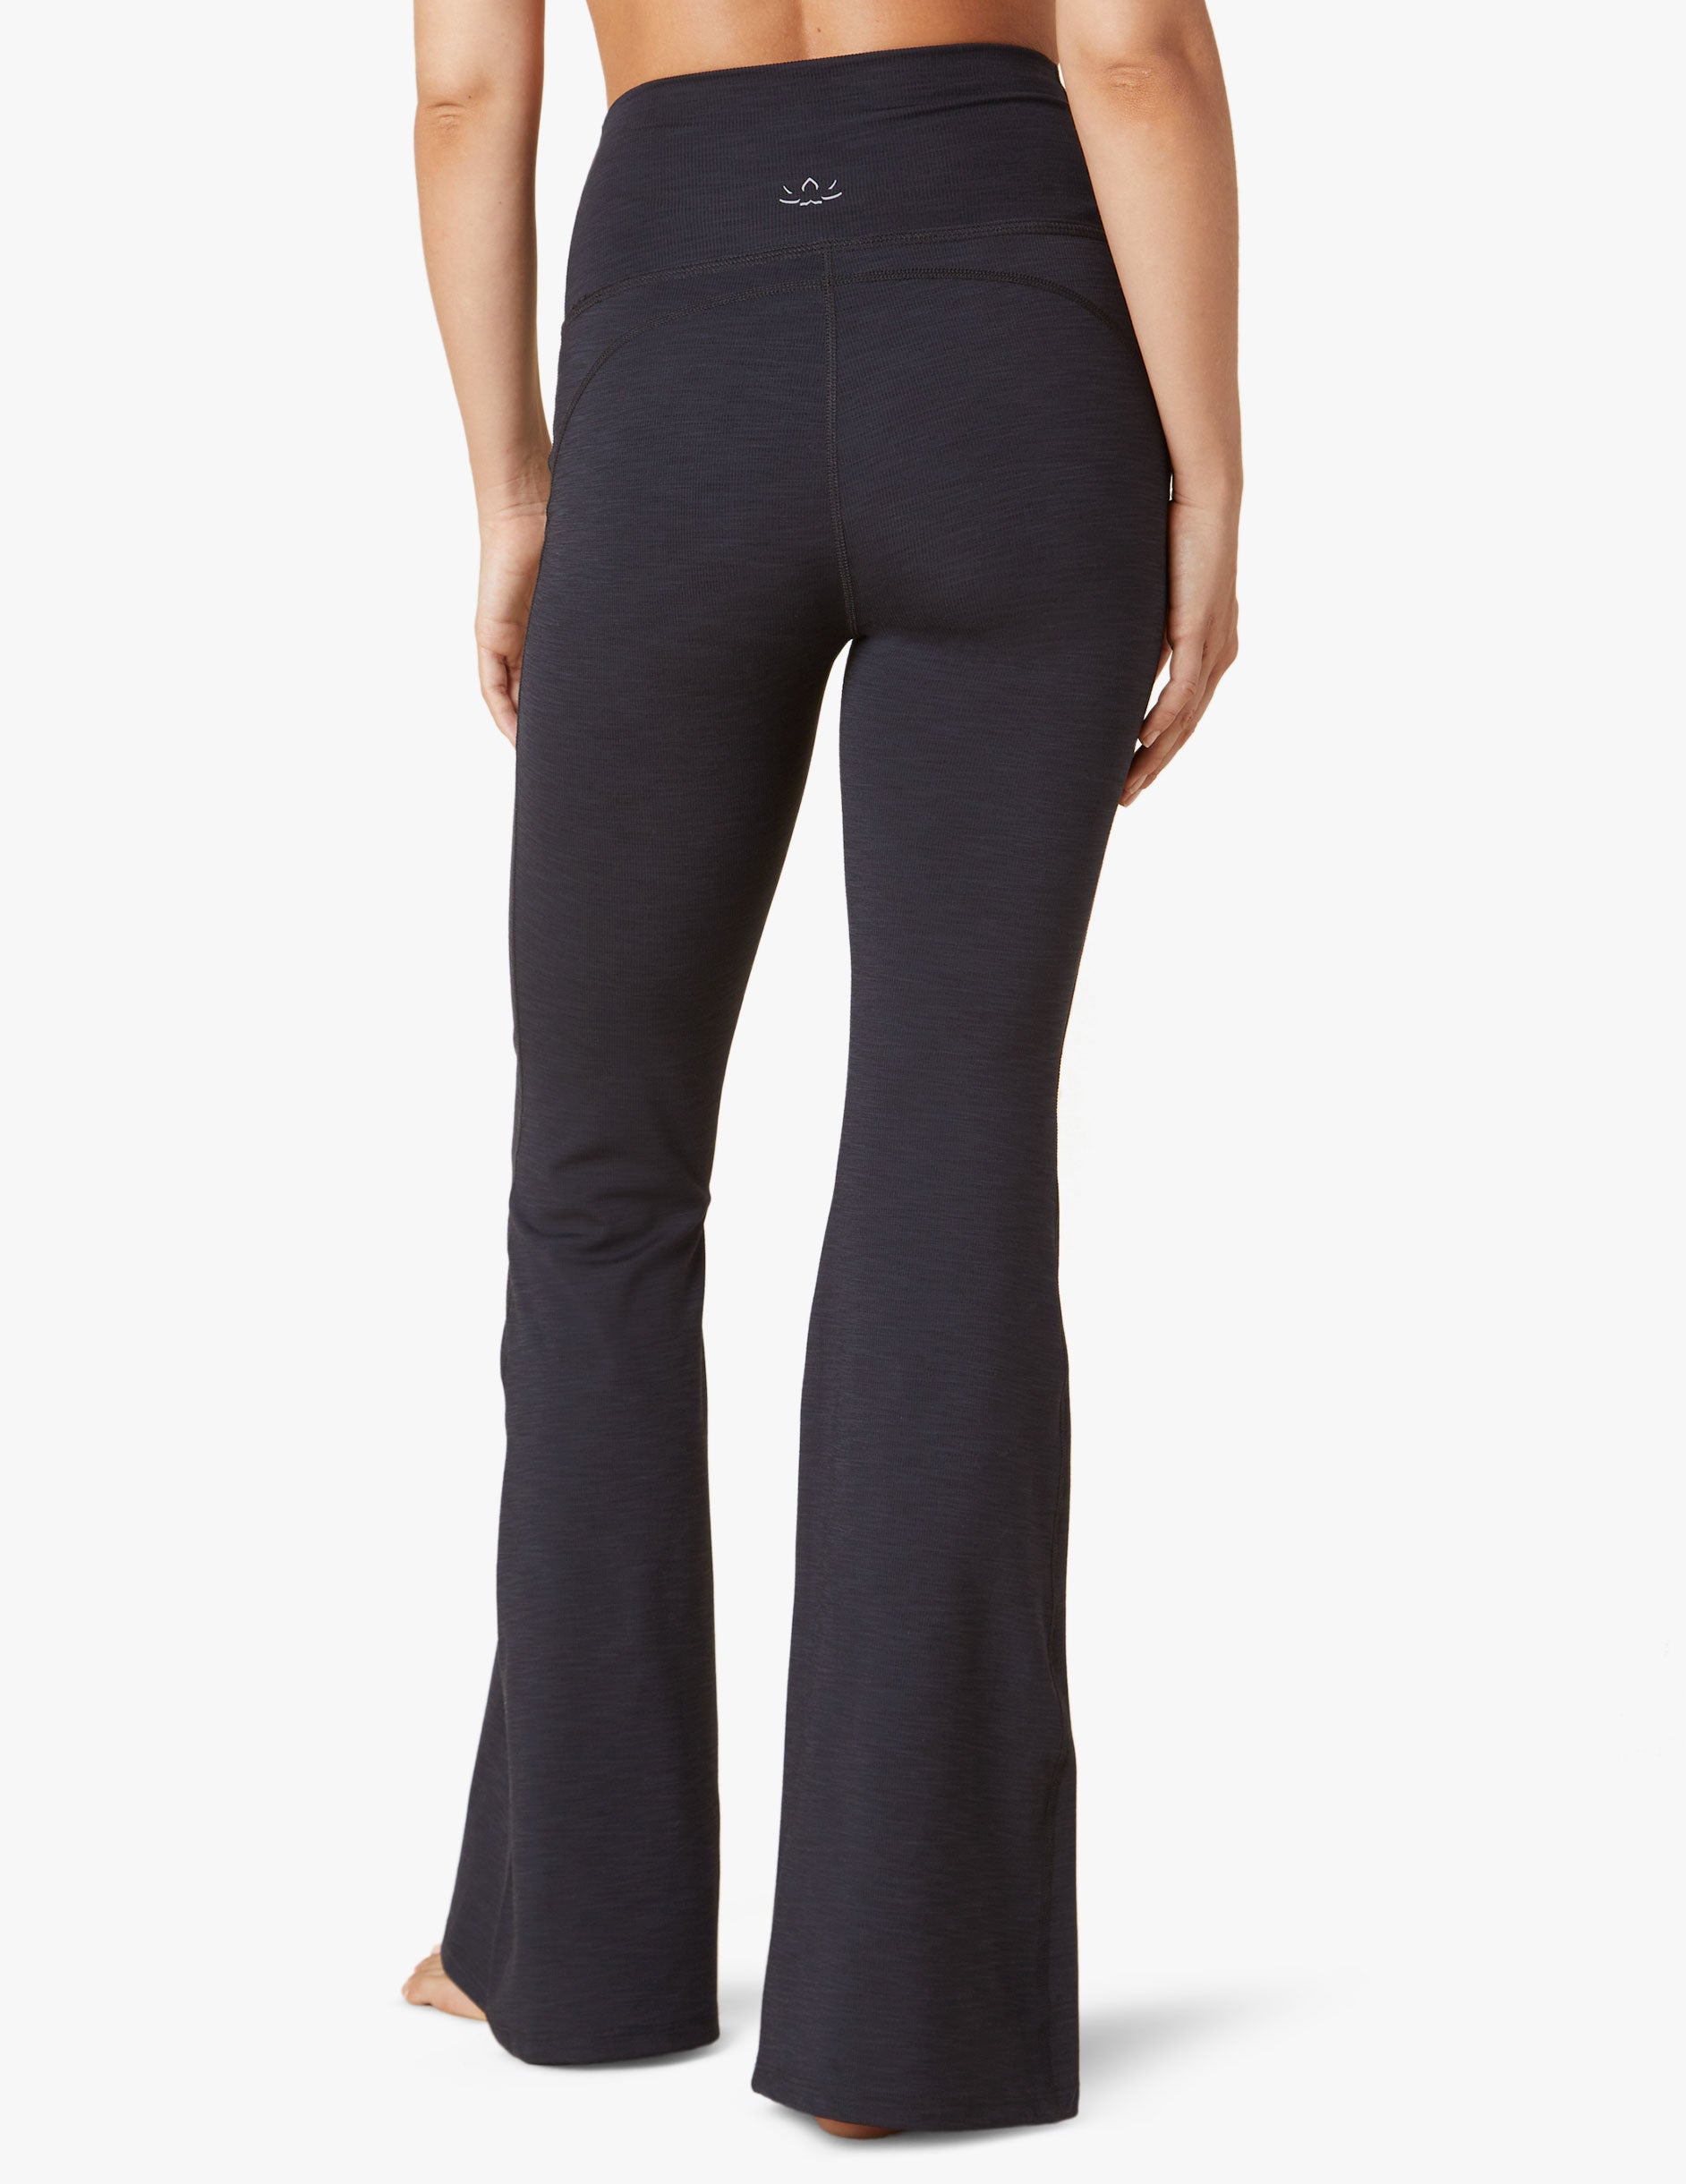 Heather Rib All Day Flare Pant Image 4